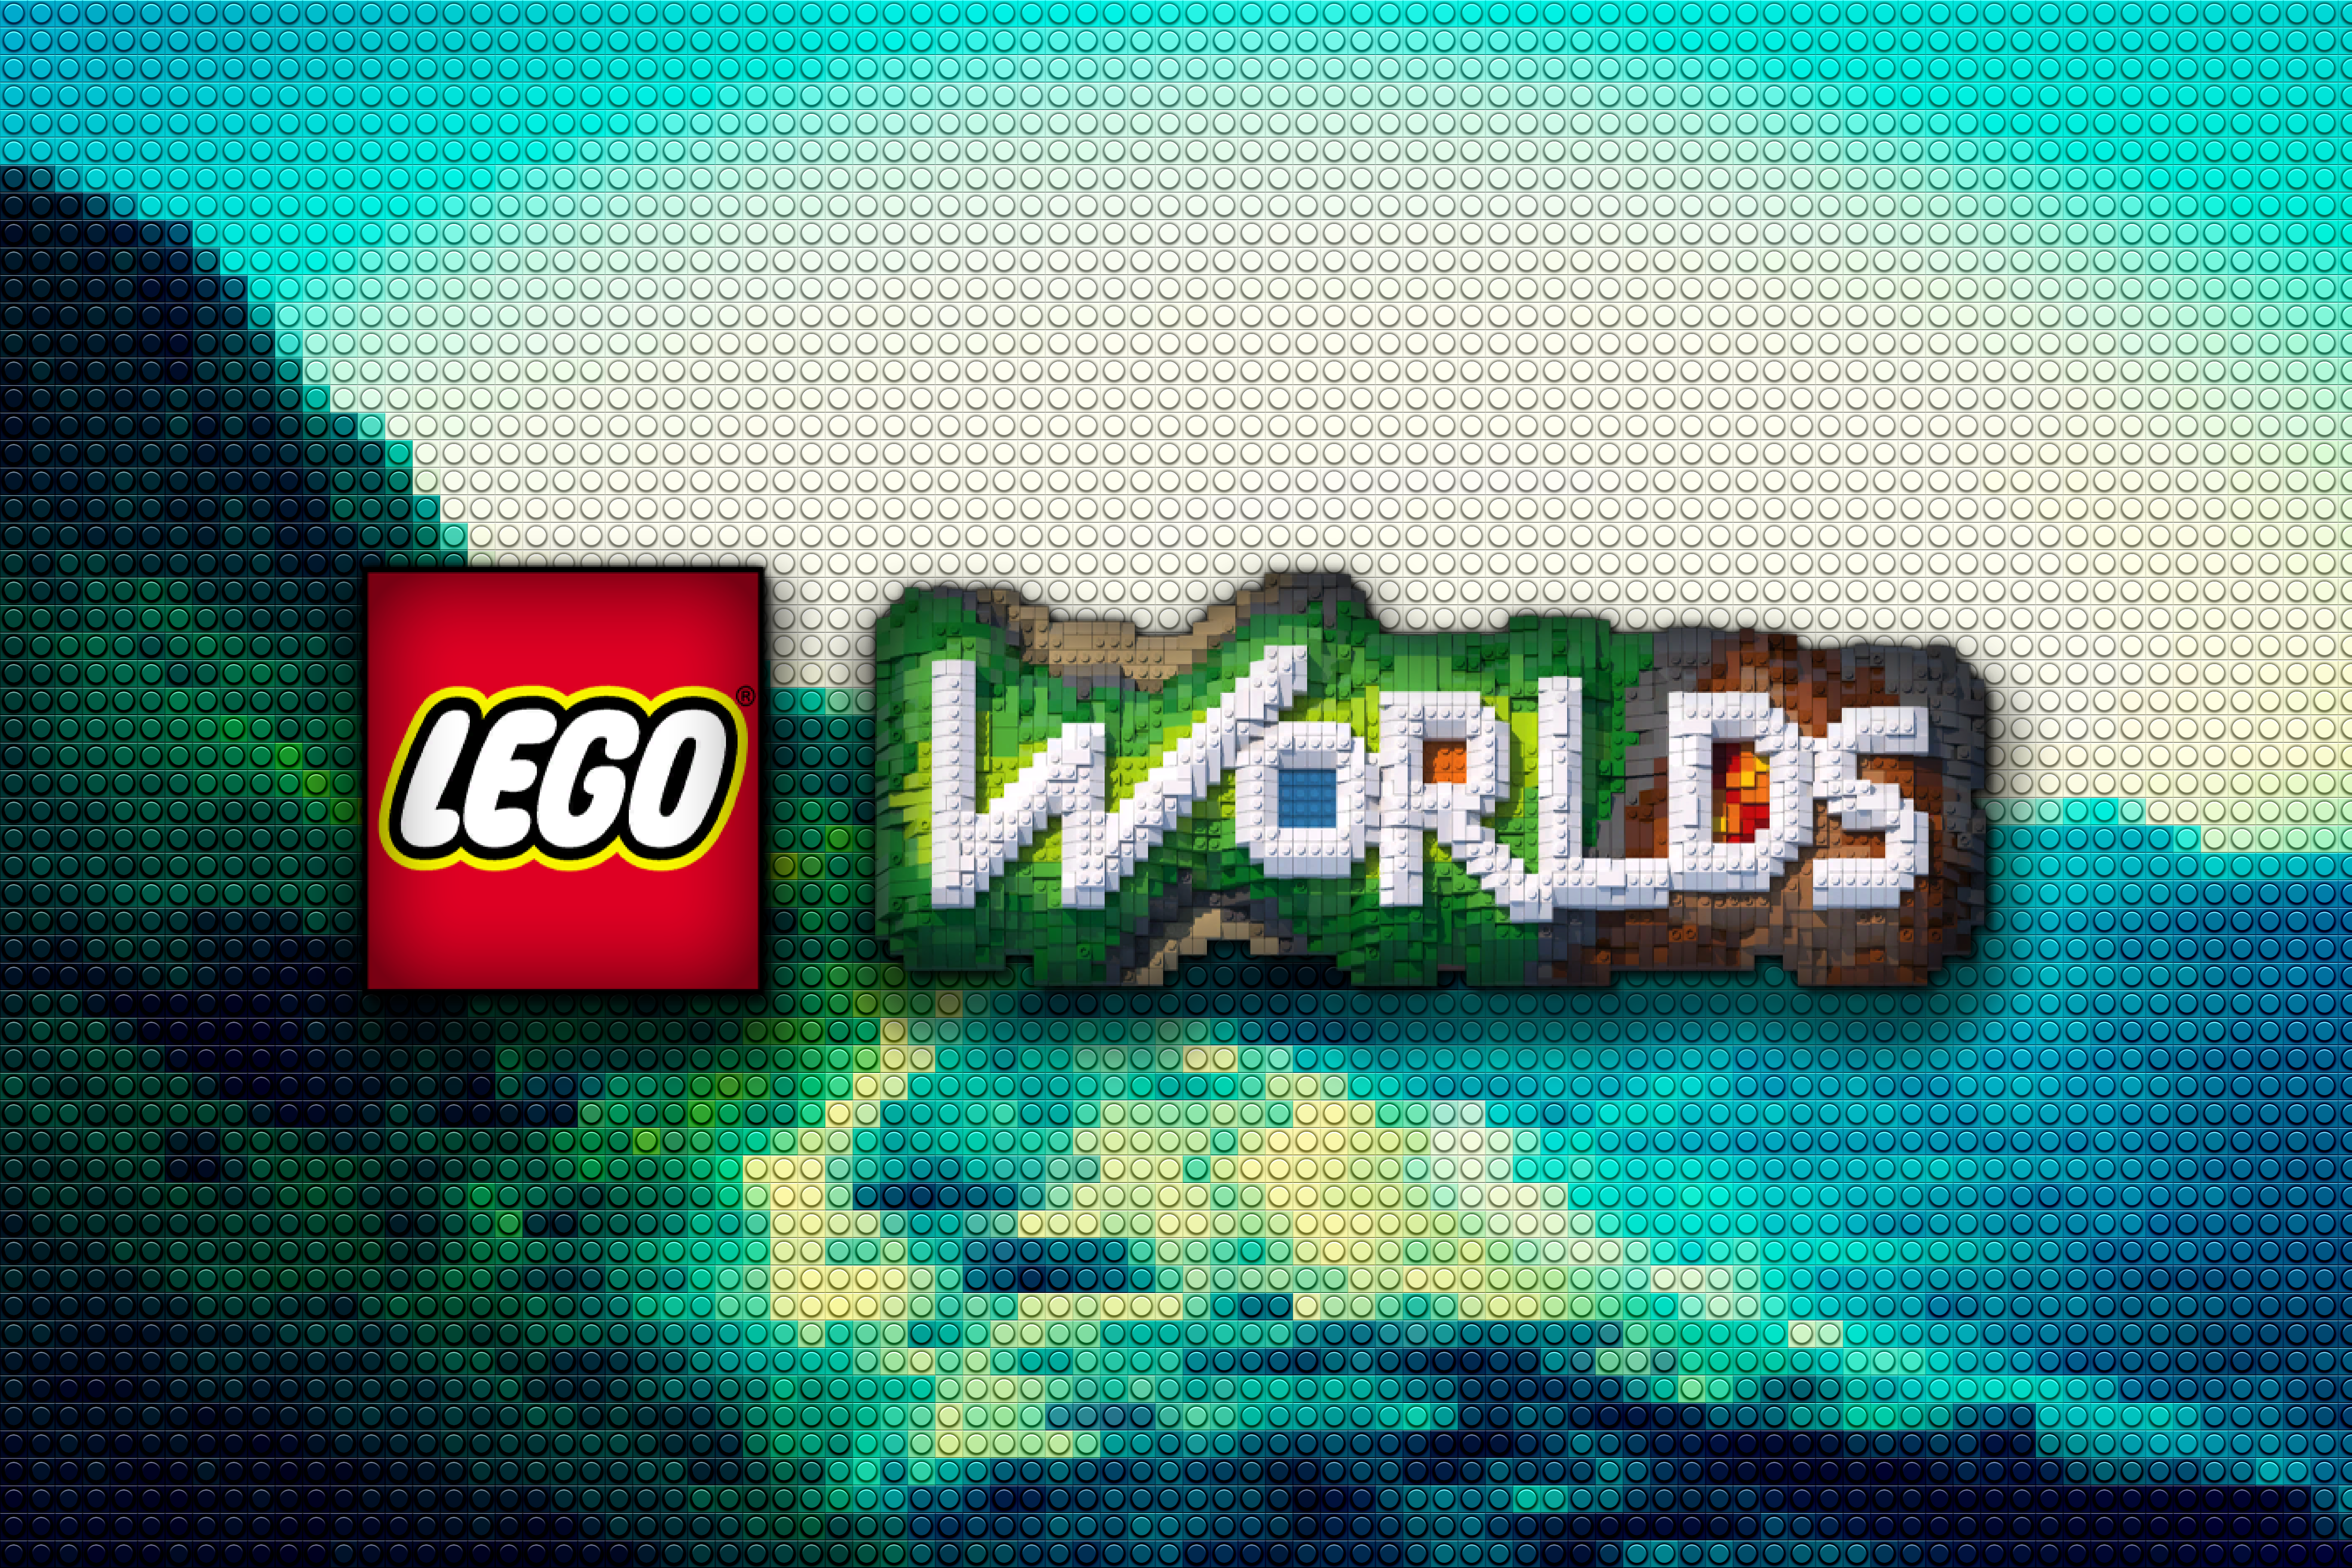 lego worlds android free download